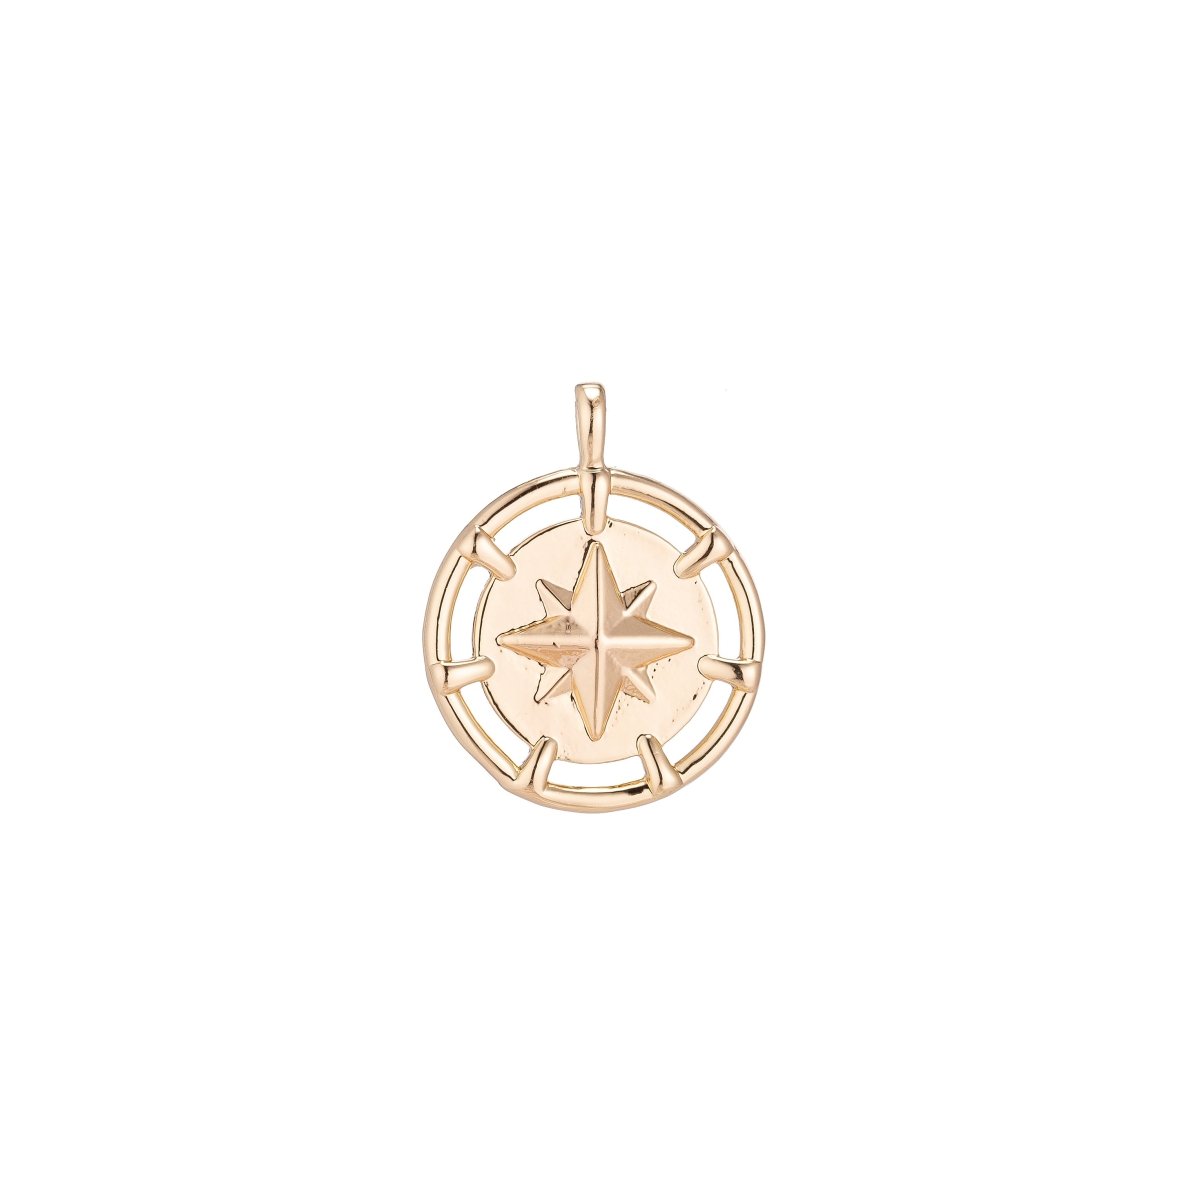 Dainty 18k Gold Filled North Star Charm Starry Twinkle Starburst Coin Pendant for Layer Necklace Earring Bracelet Jewelry Making Supplies C-079 - DLUXCA